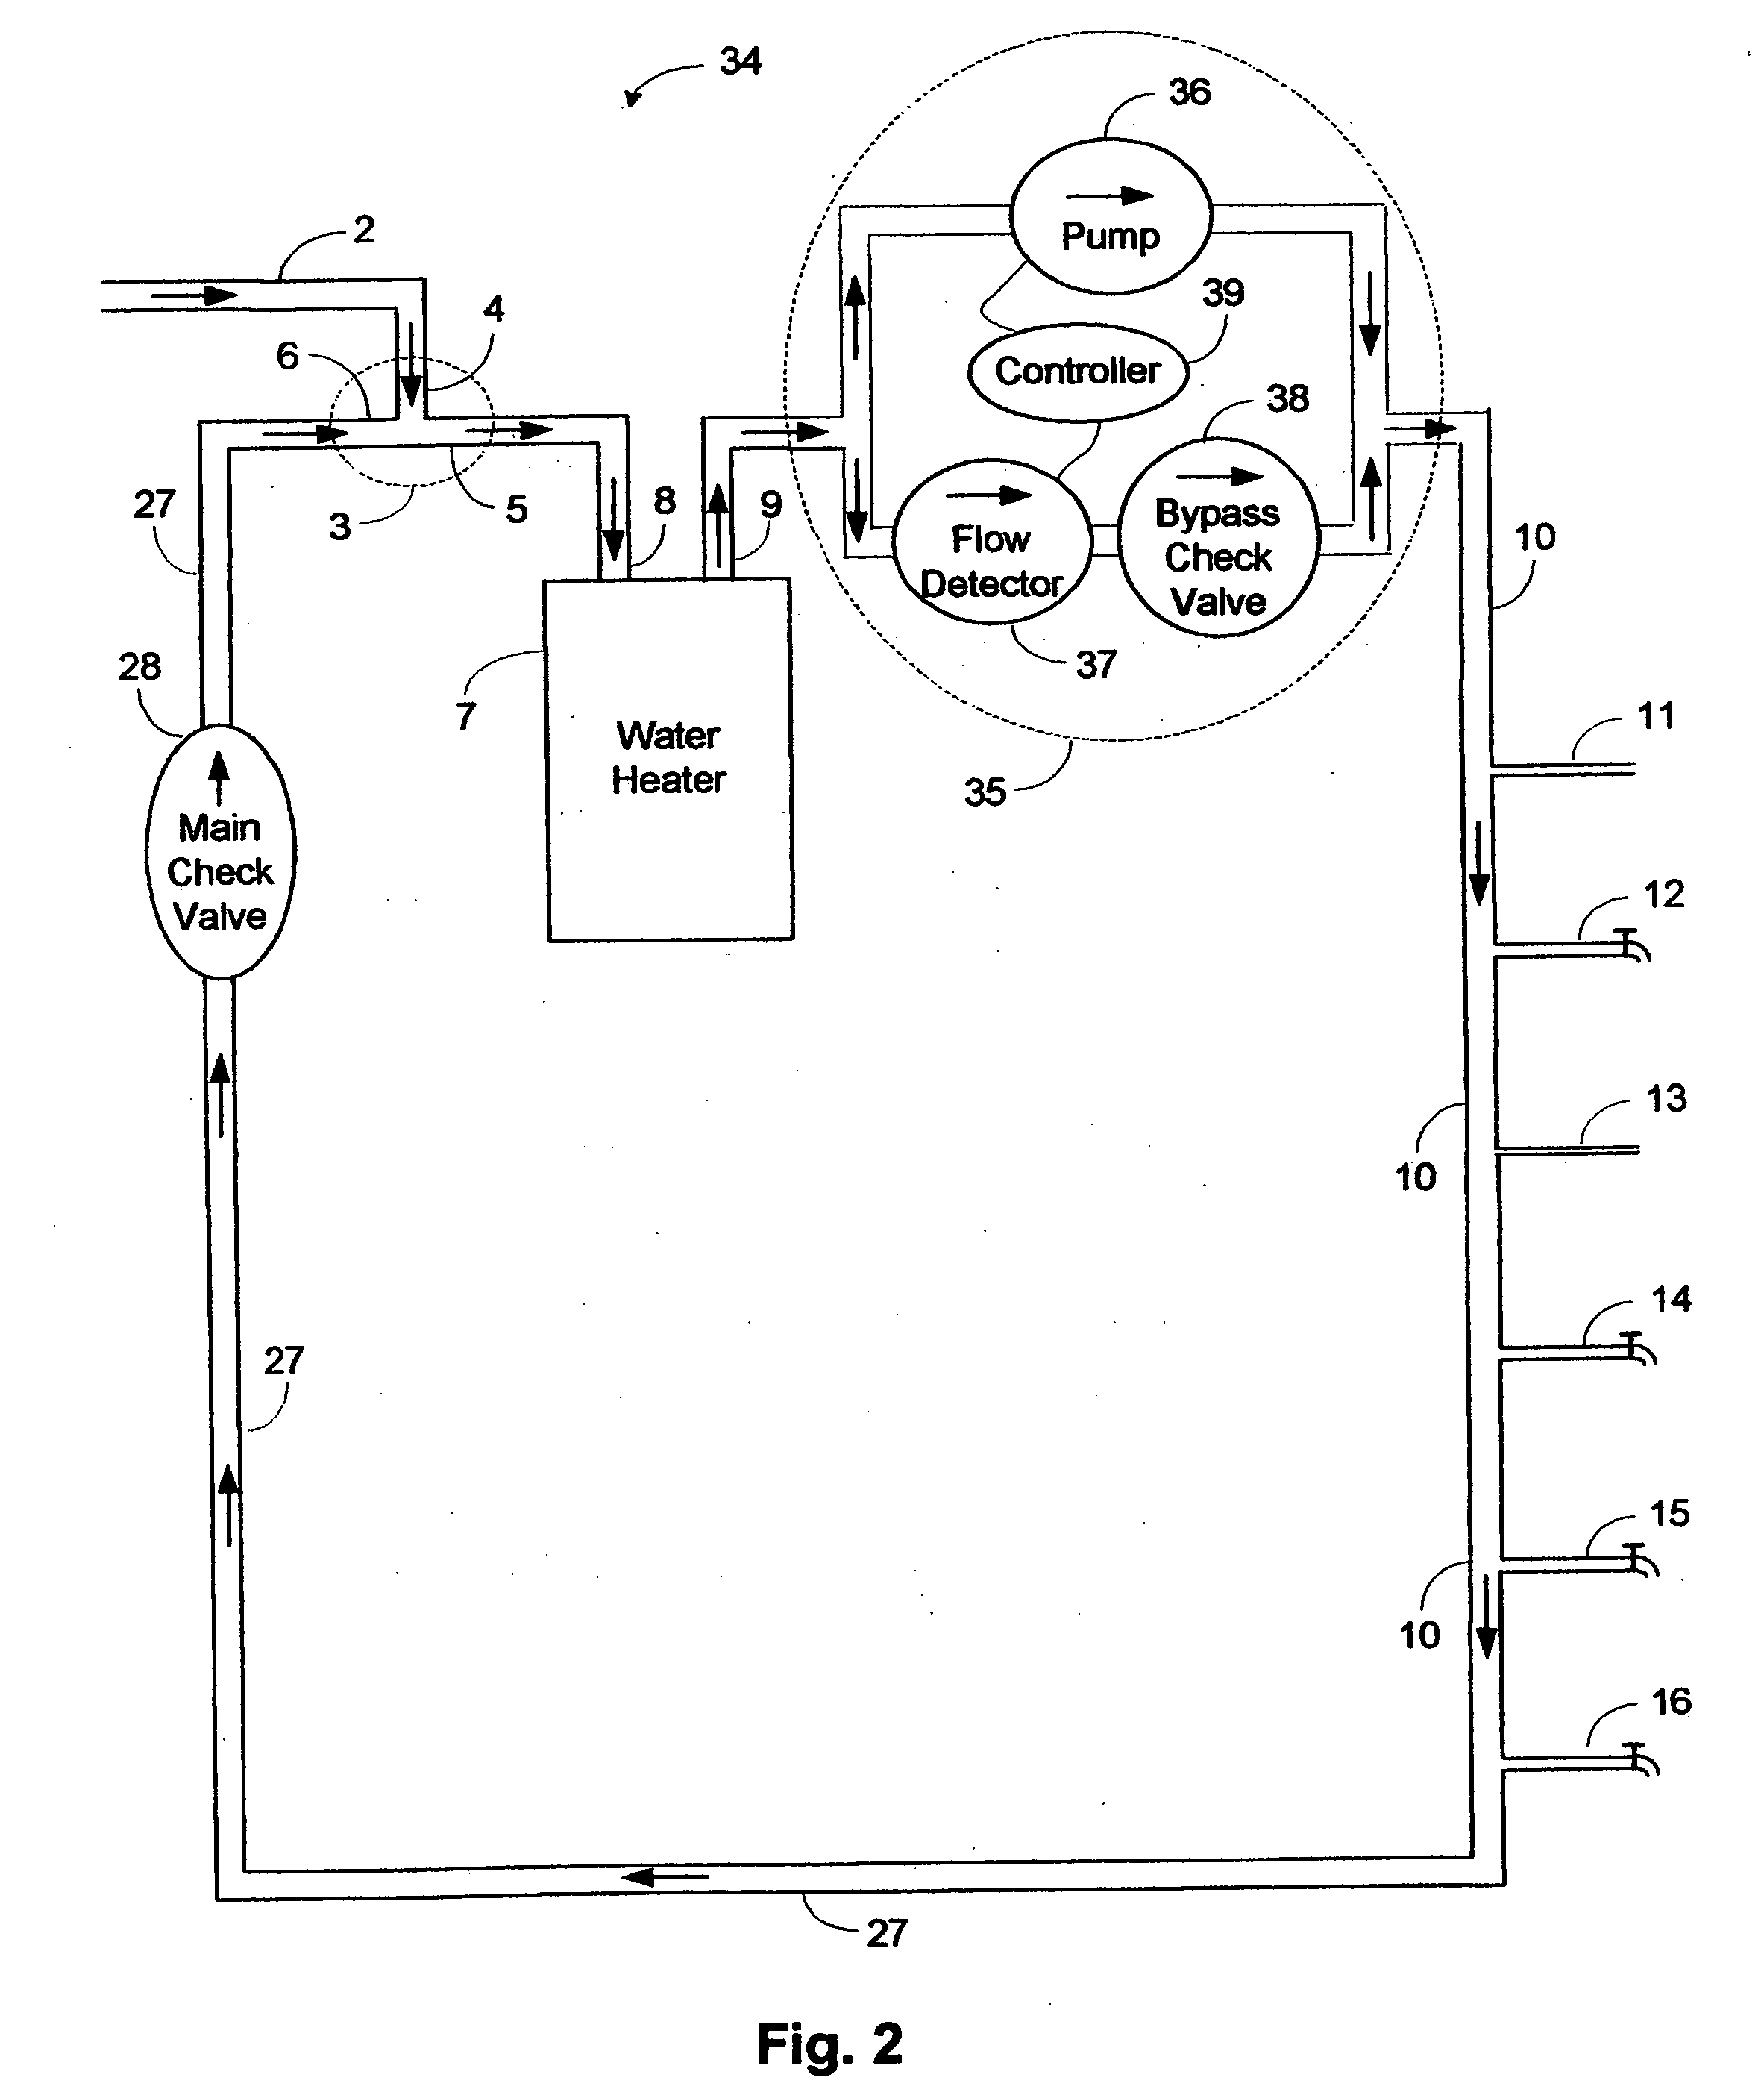 Water conservation / hot water recirculation system utilizing timer and demand method